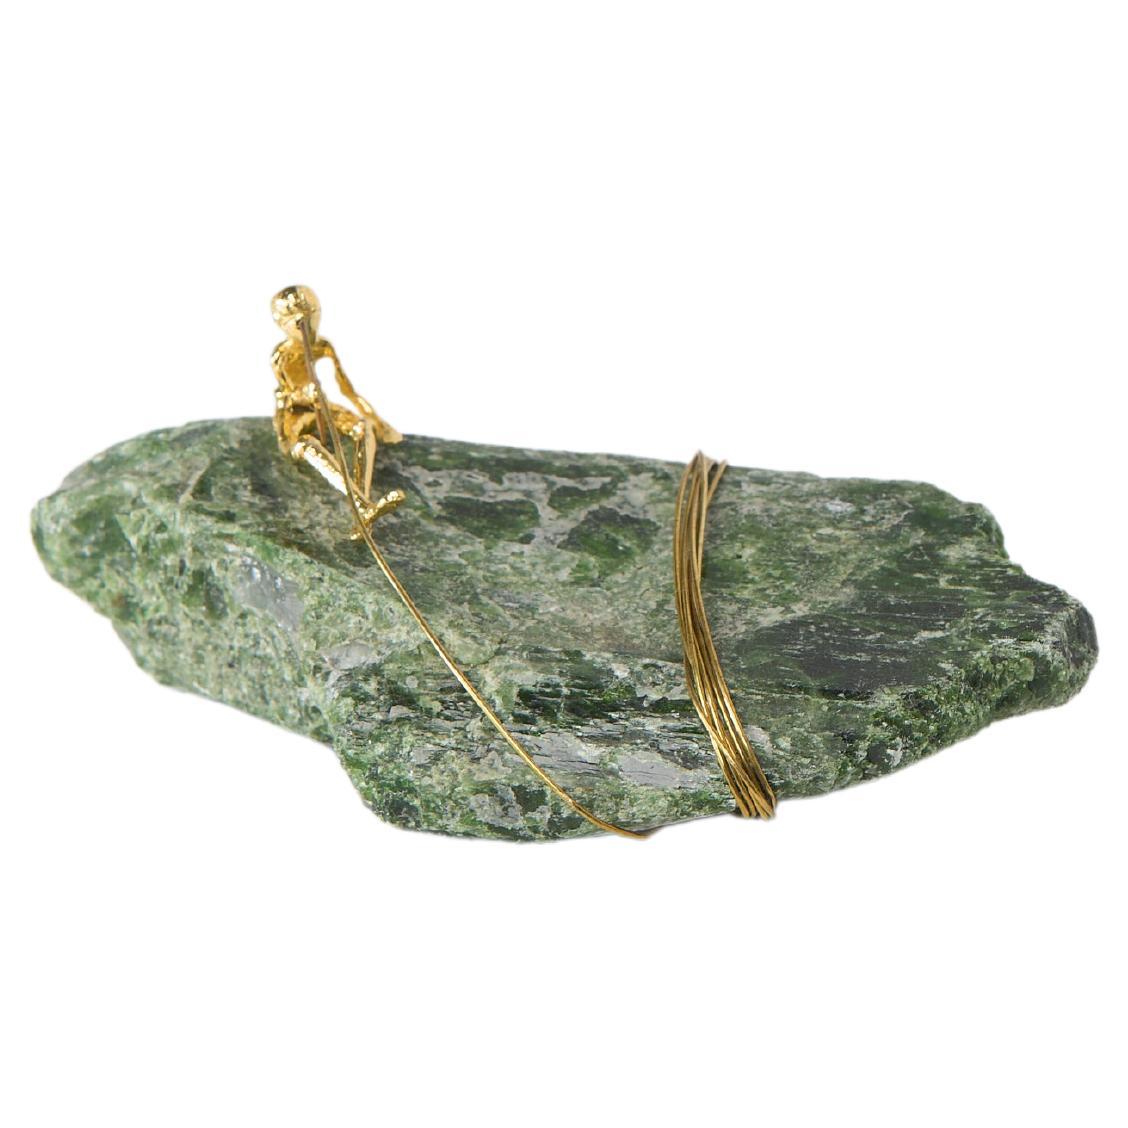 Pescador Series, N828 Diopside Fisherman Table Sculpture For Sale